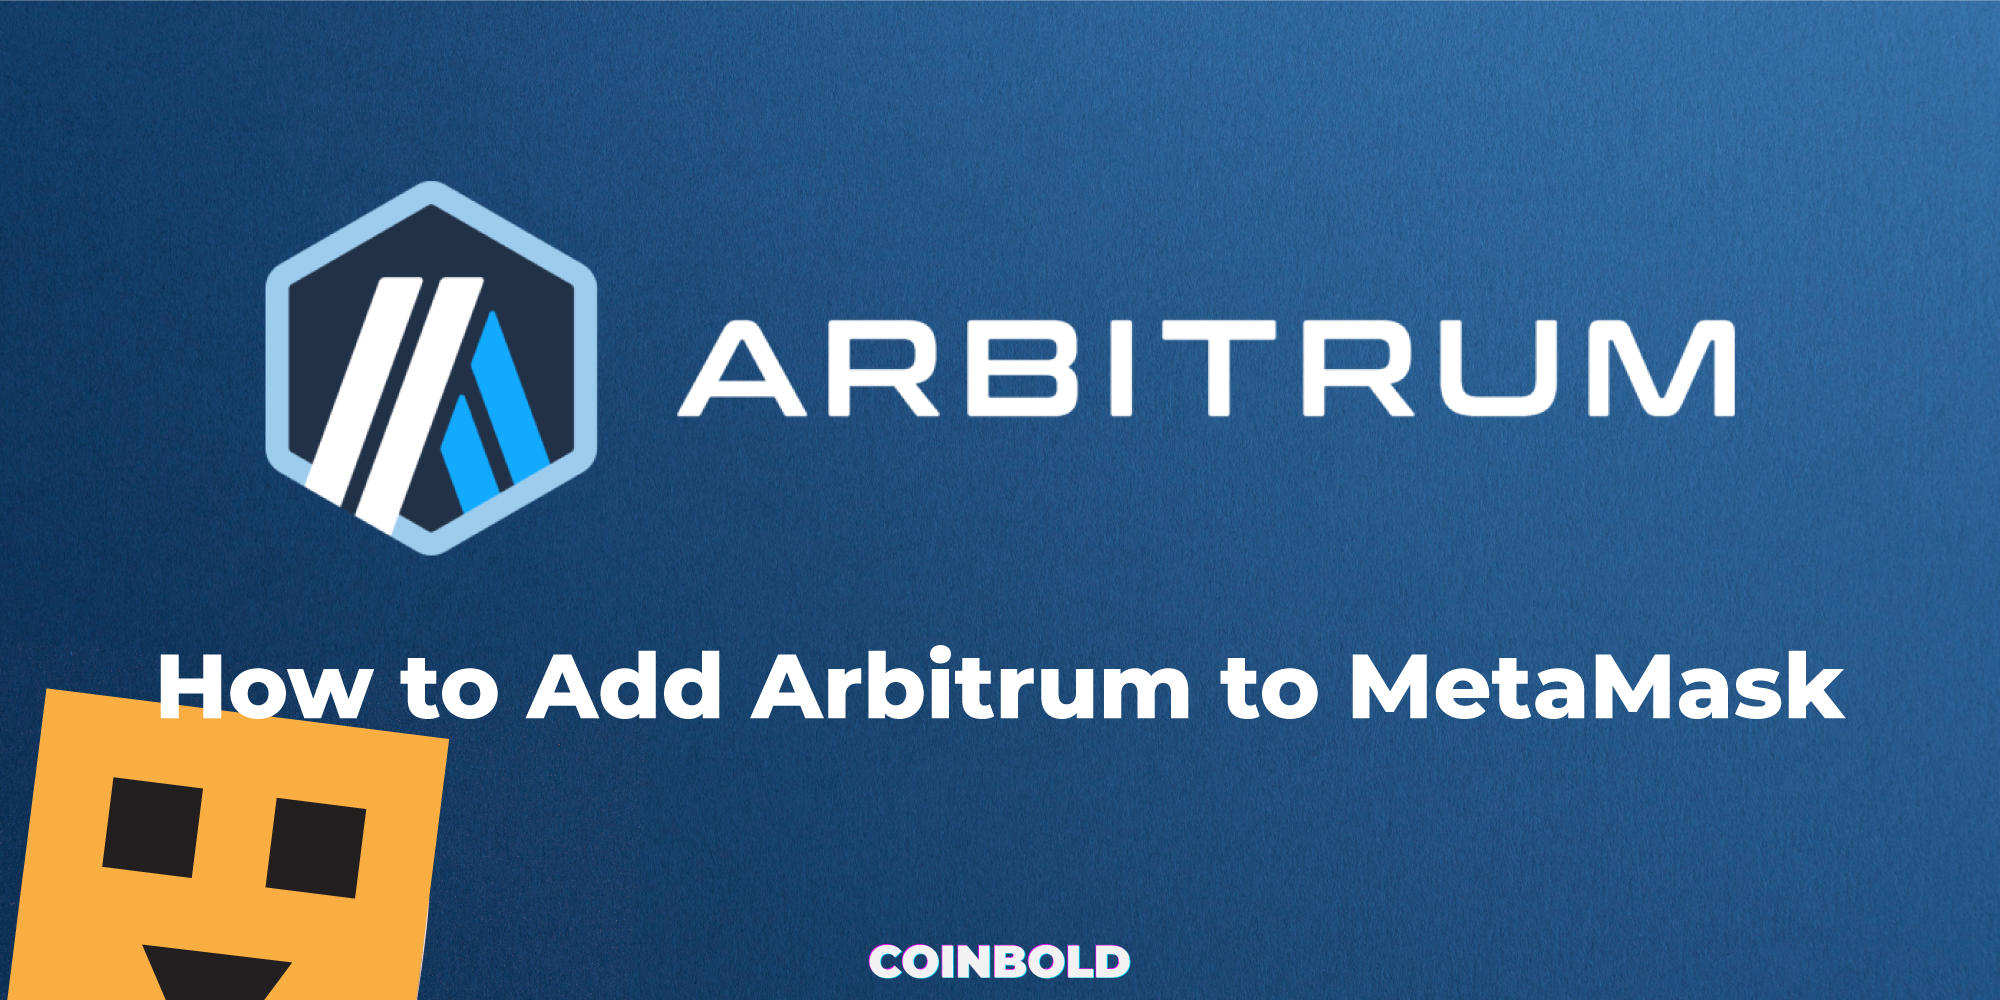 How to Add Arbitrum to MetaMask